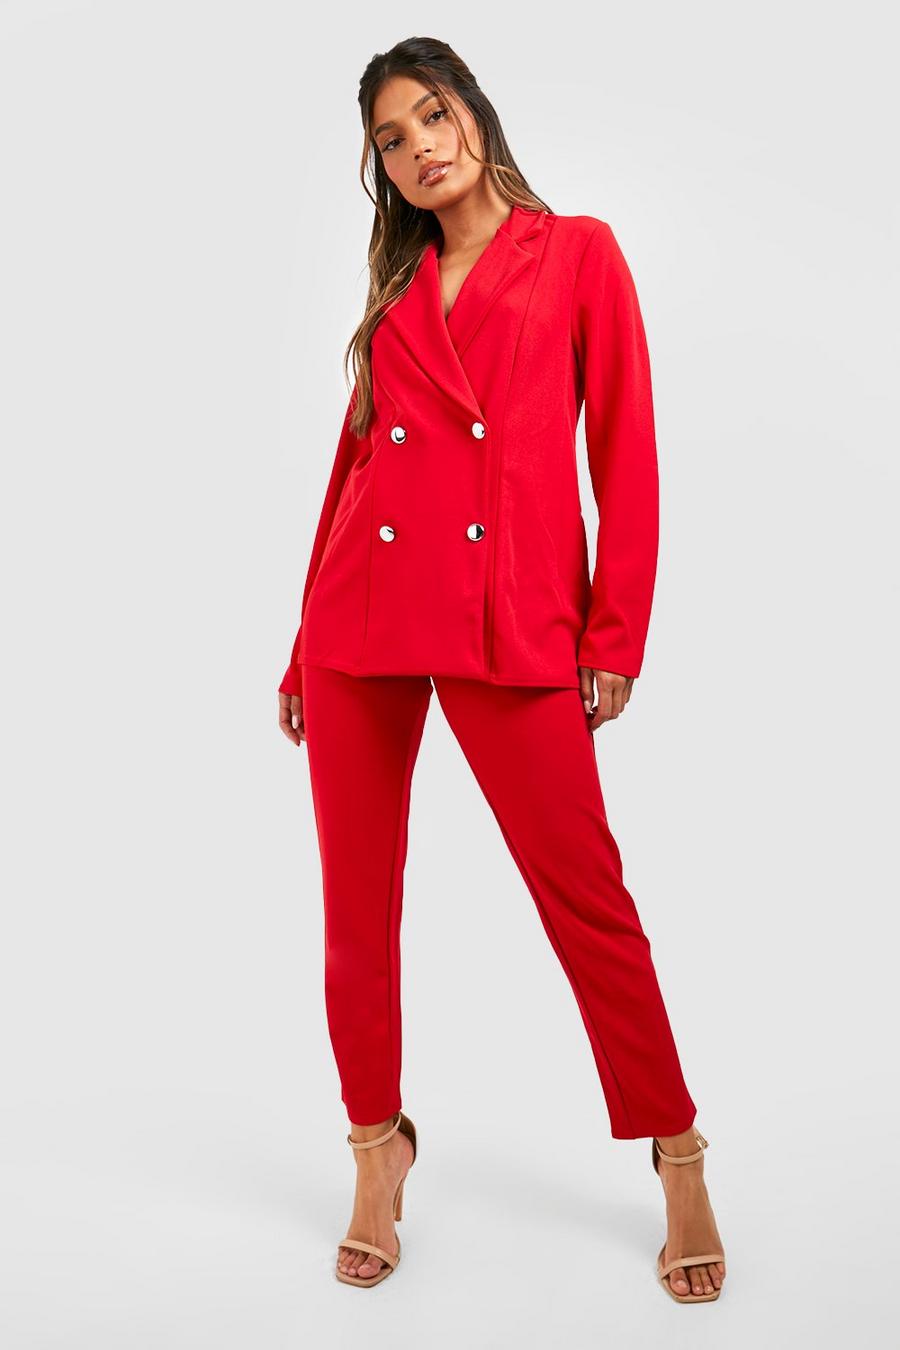 Red Double Breasted Blazer And Pants Suit Set